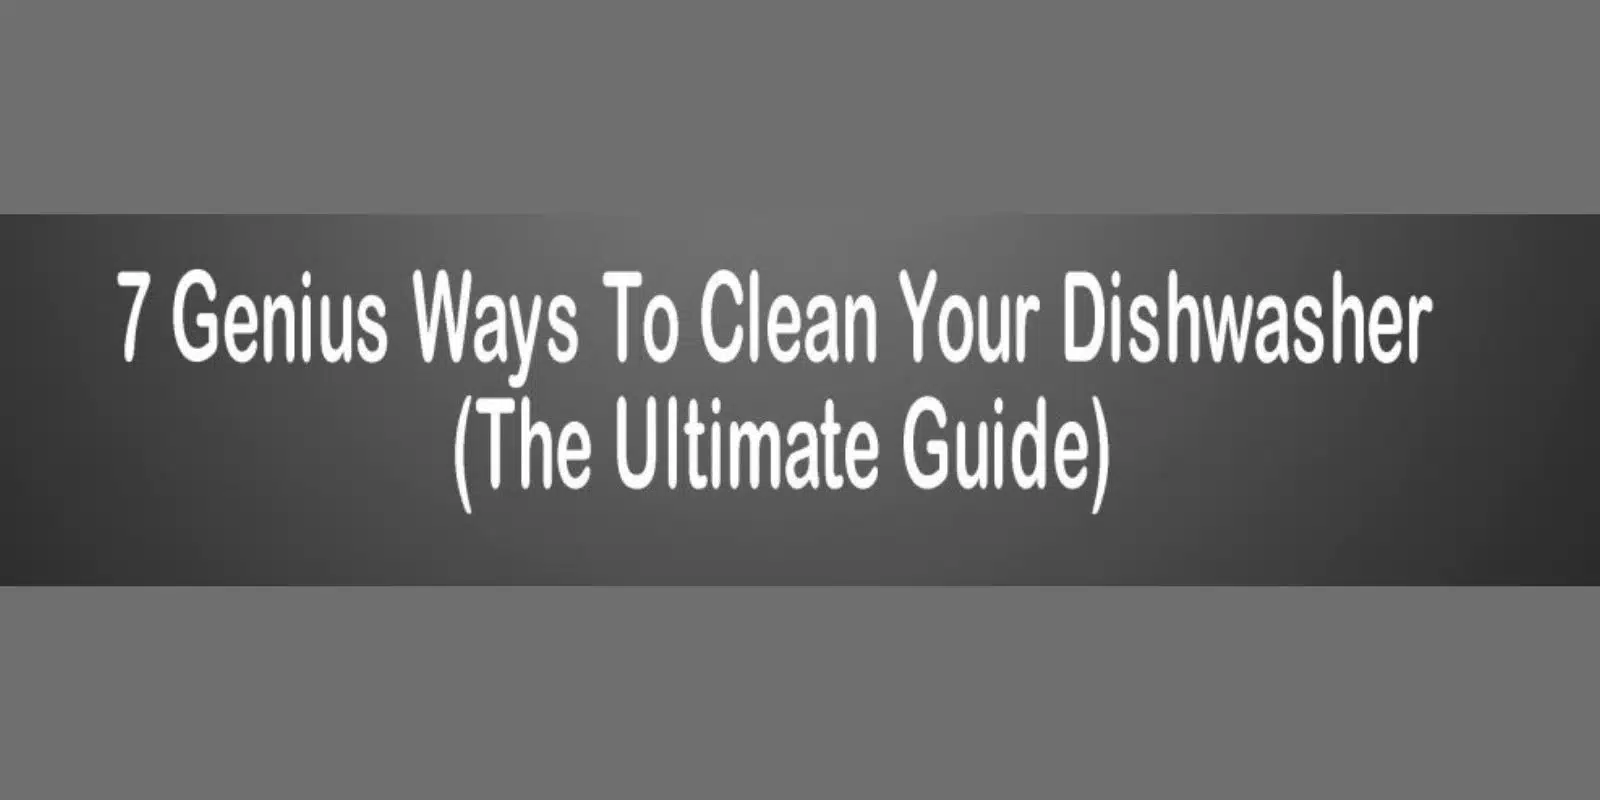 7 Genius Ways To Clean Your Dishwasher (The Ultimate Guide)